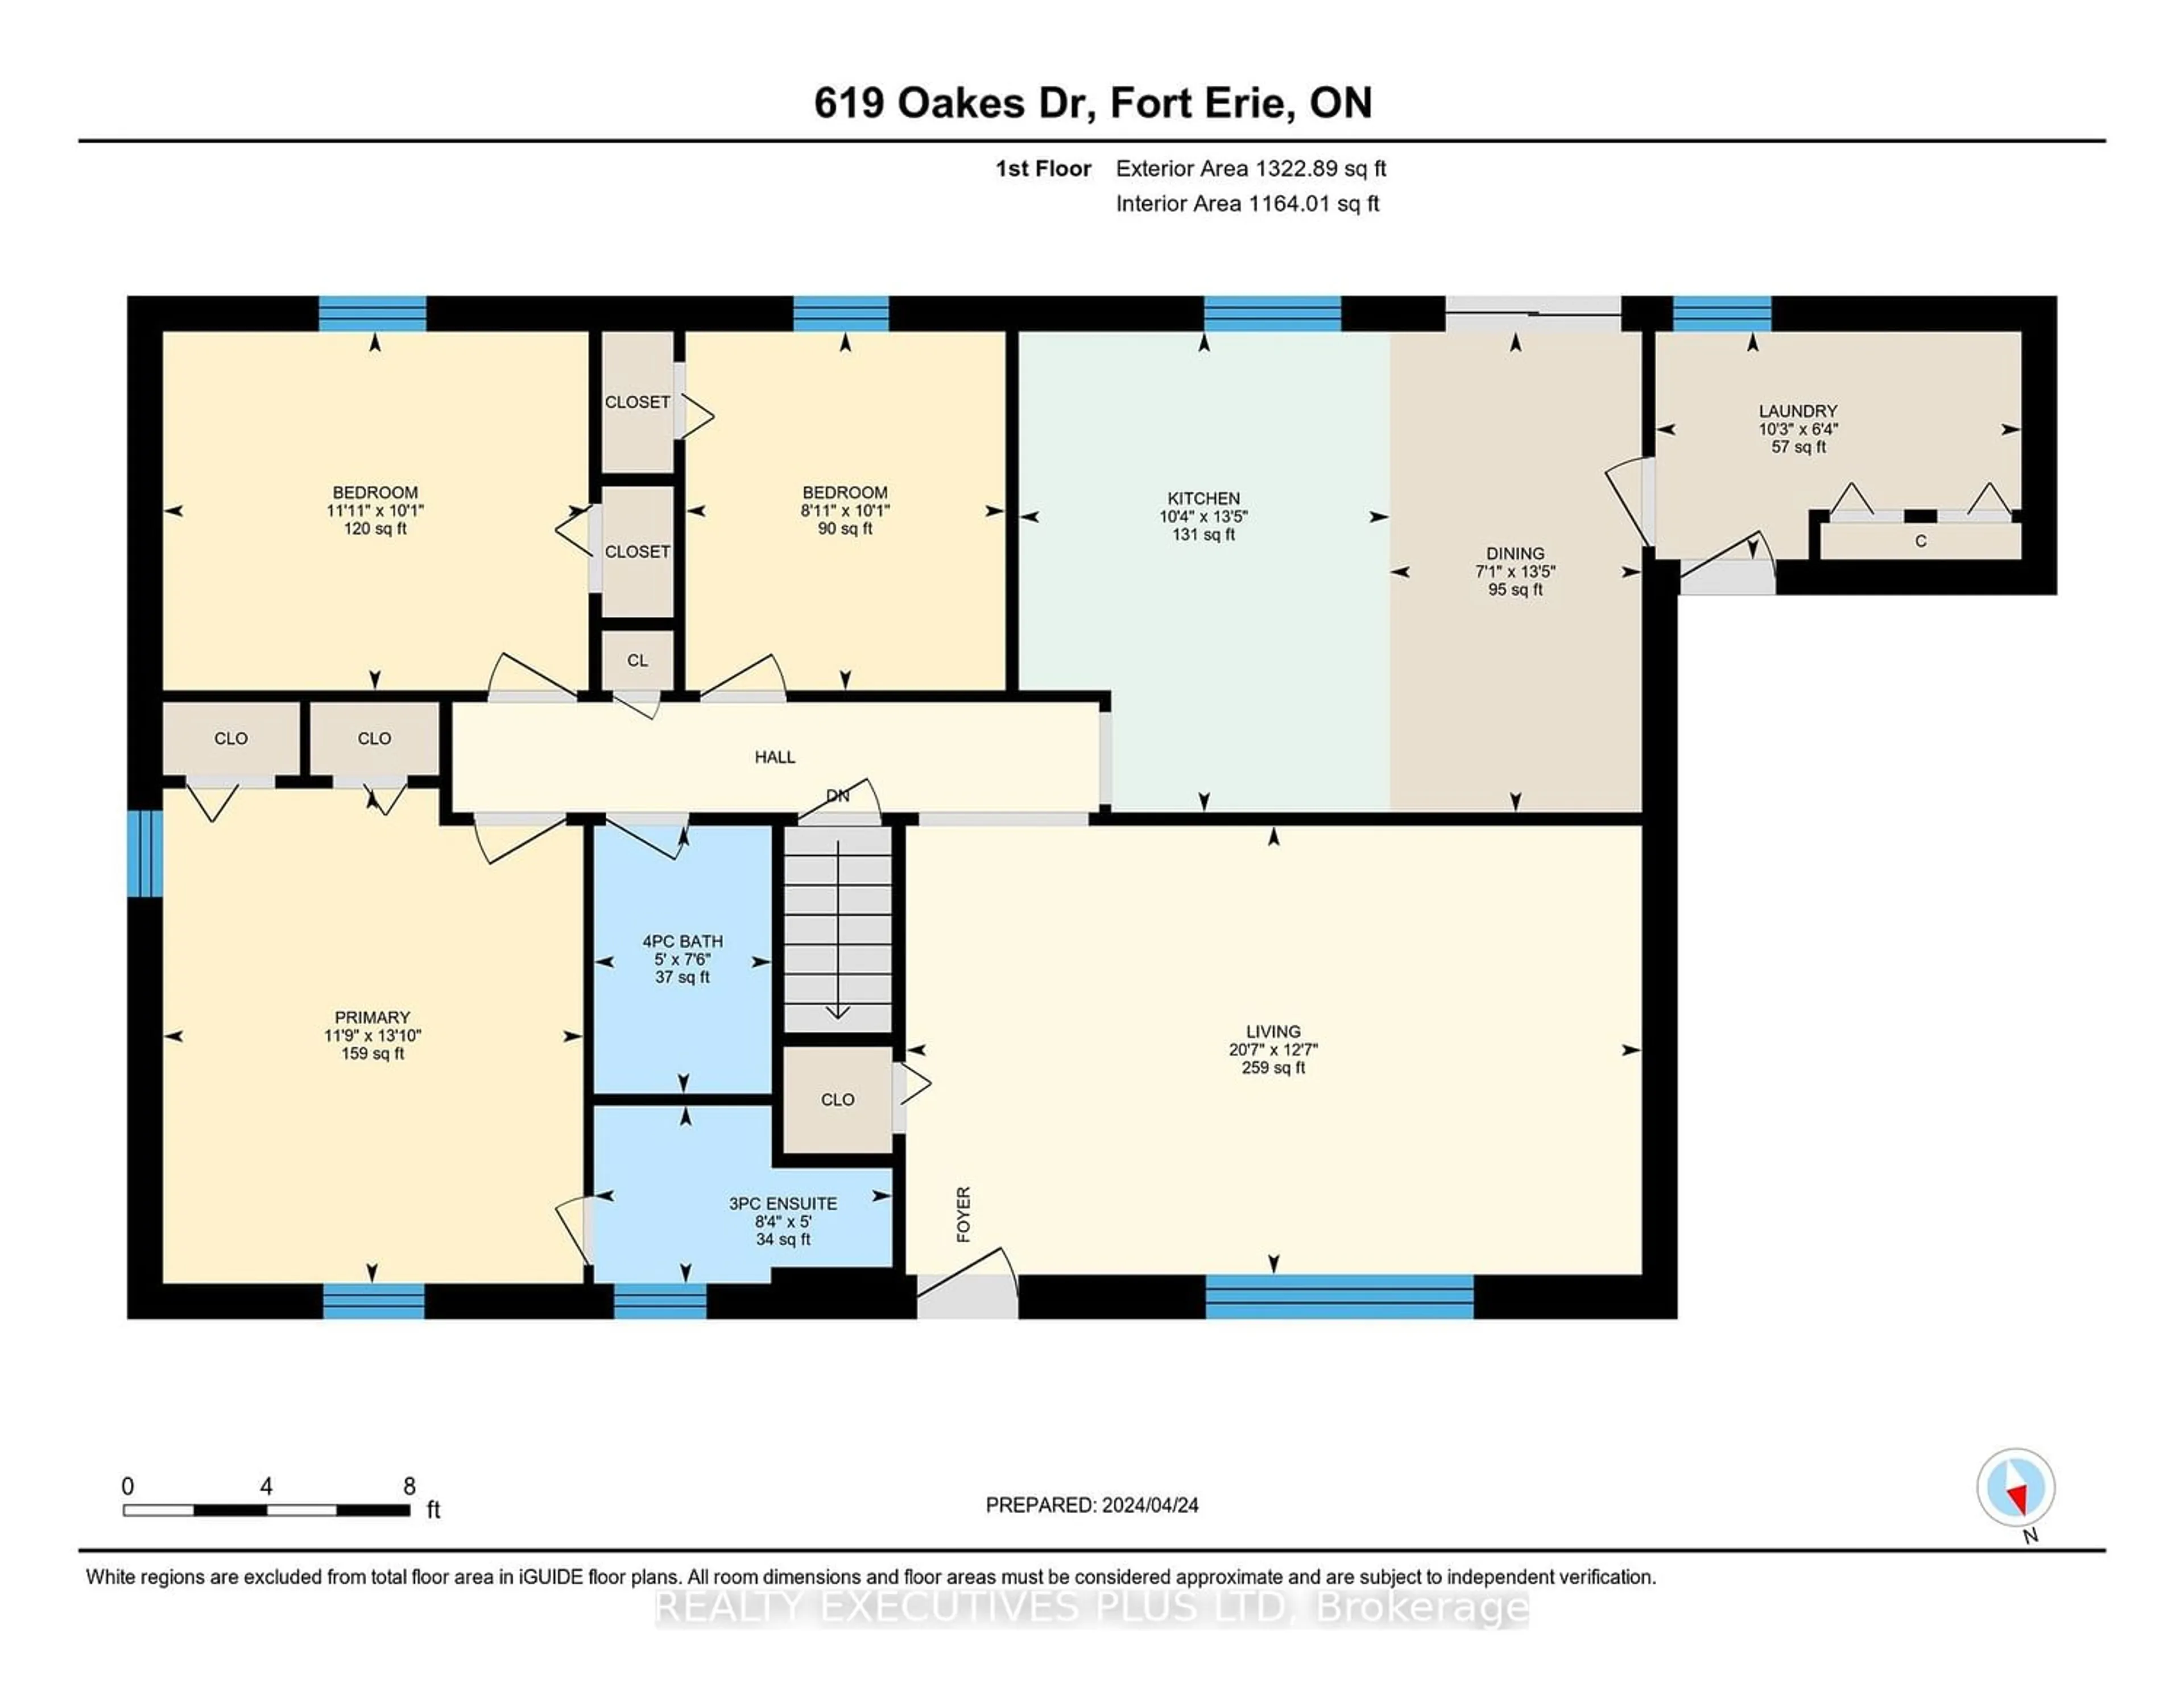 Floor plan for 619 Oakes Dr, Fort Erie Ontario L2A 6B2